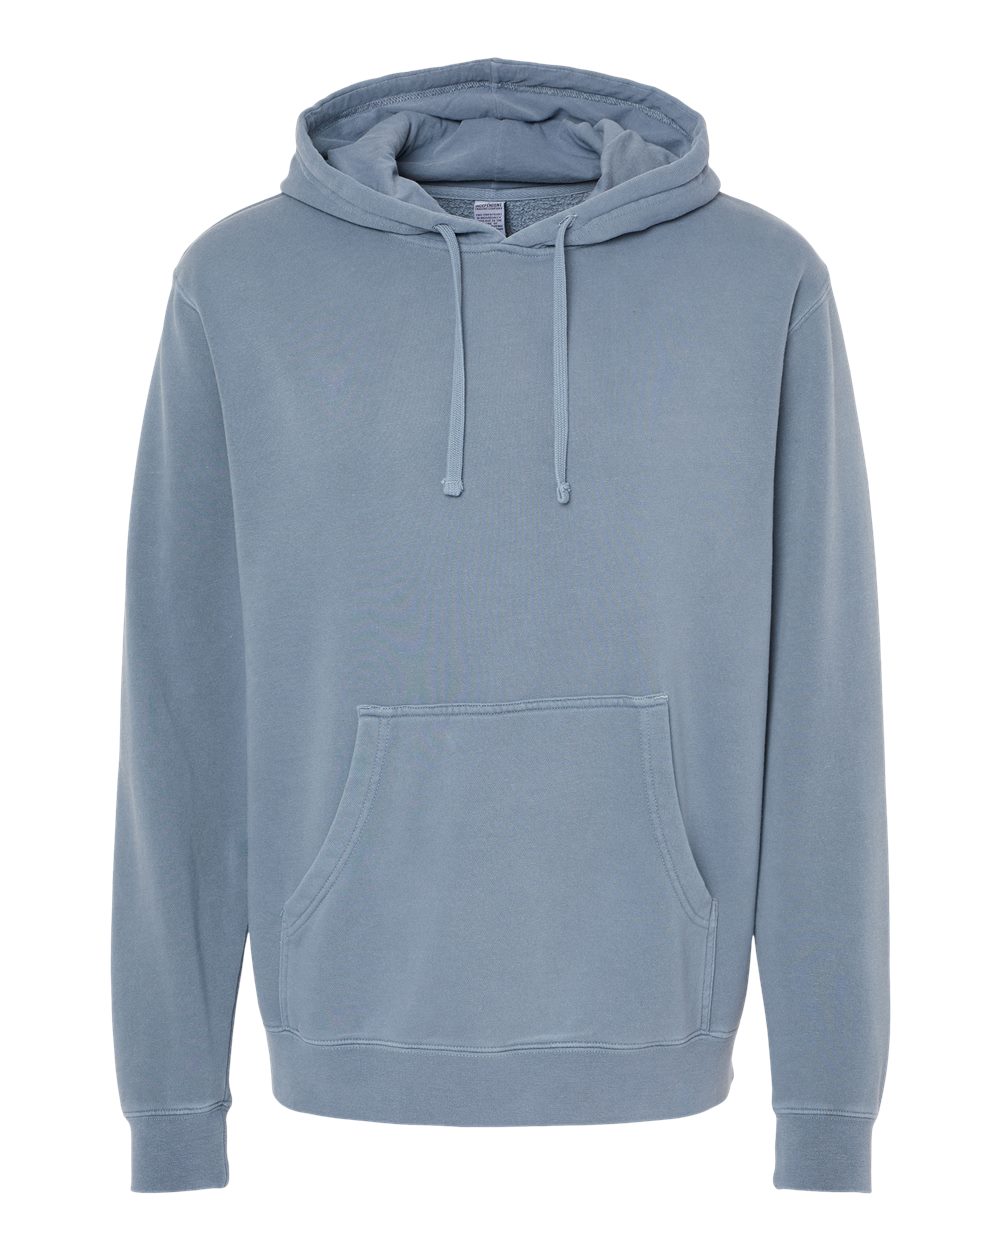 Independent Trading Co® Midweight Pigment-Dyed Hooded Sweatshirt